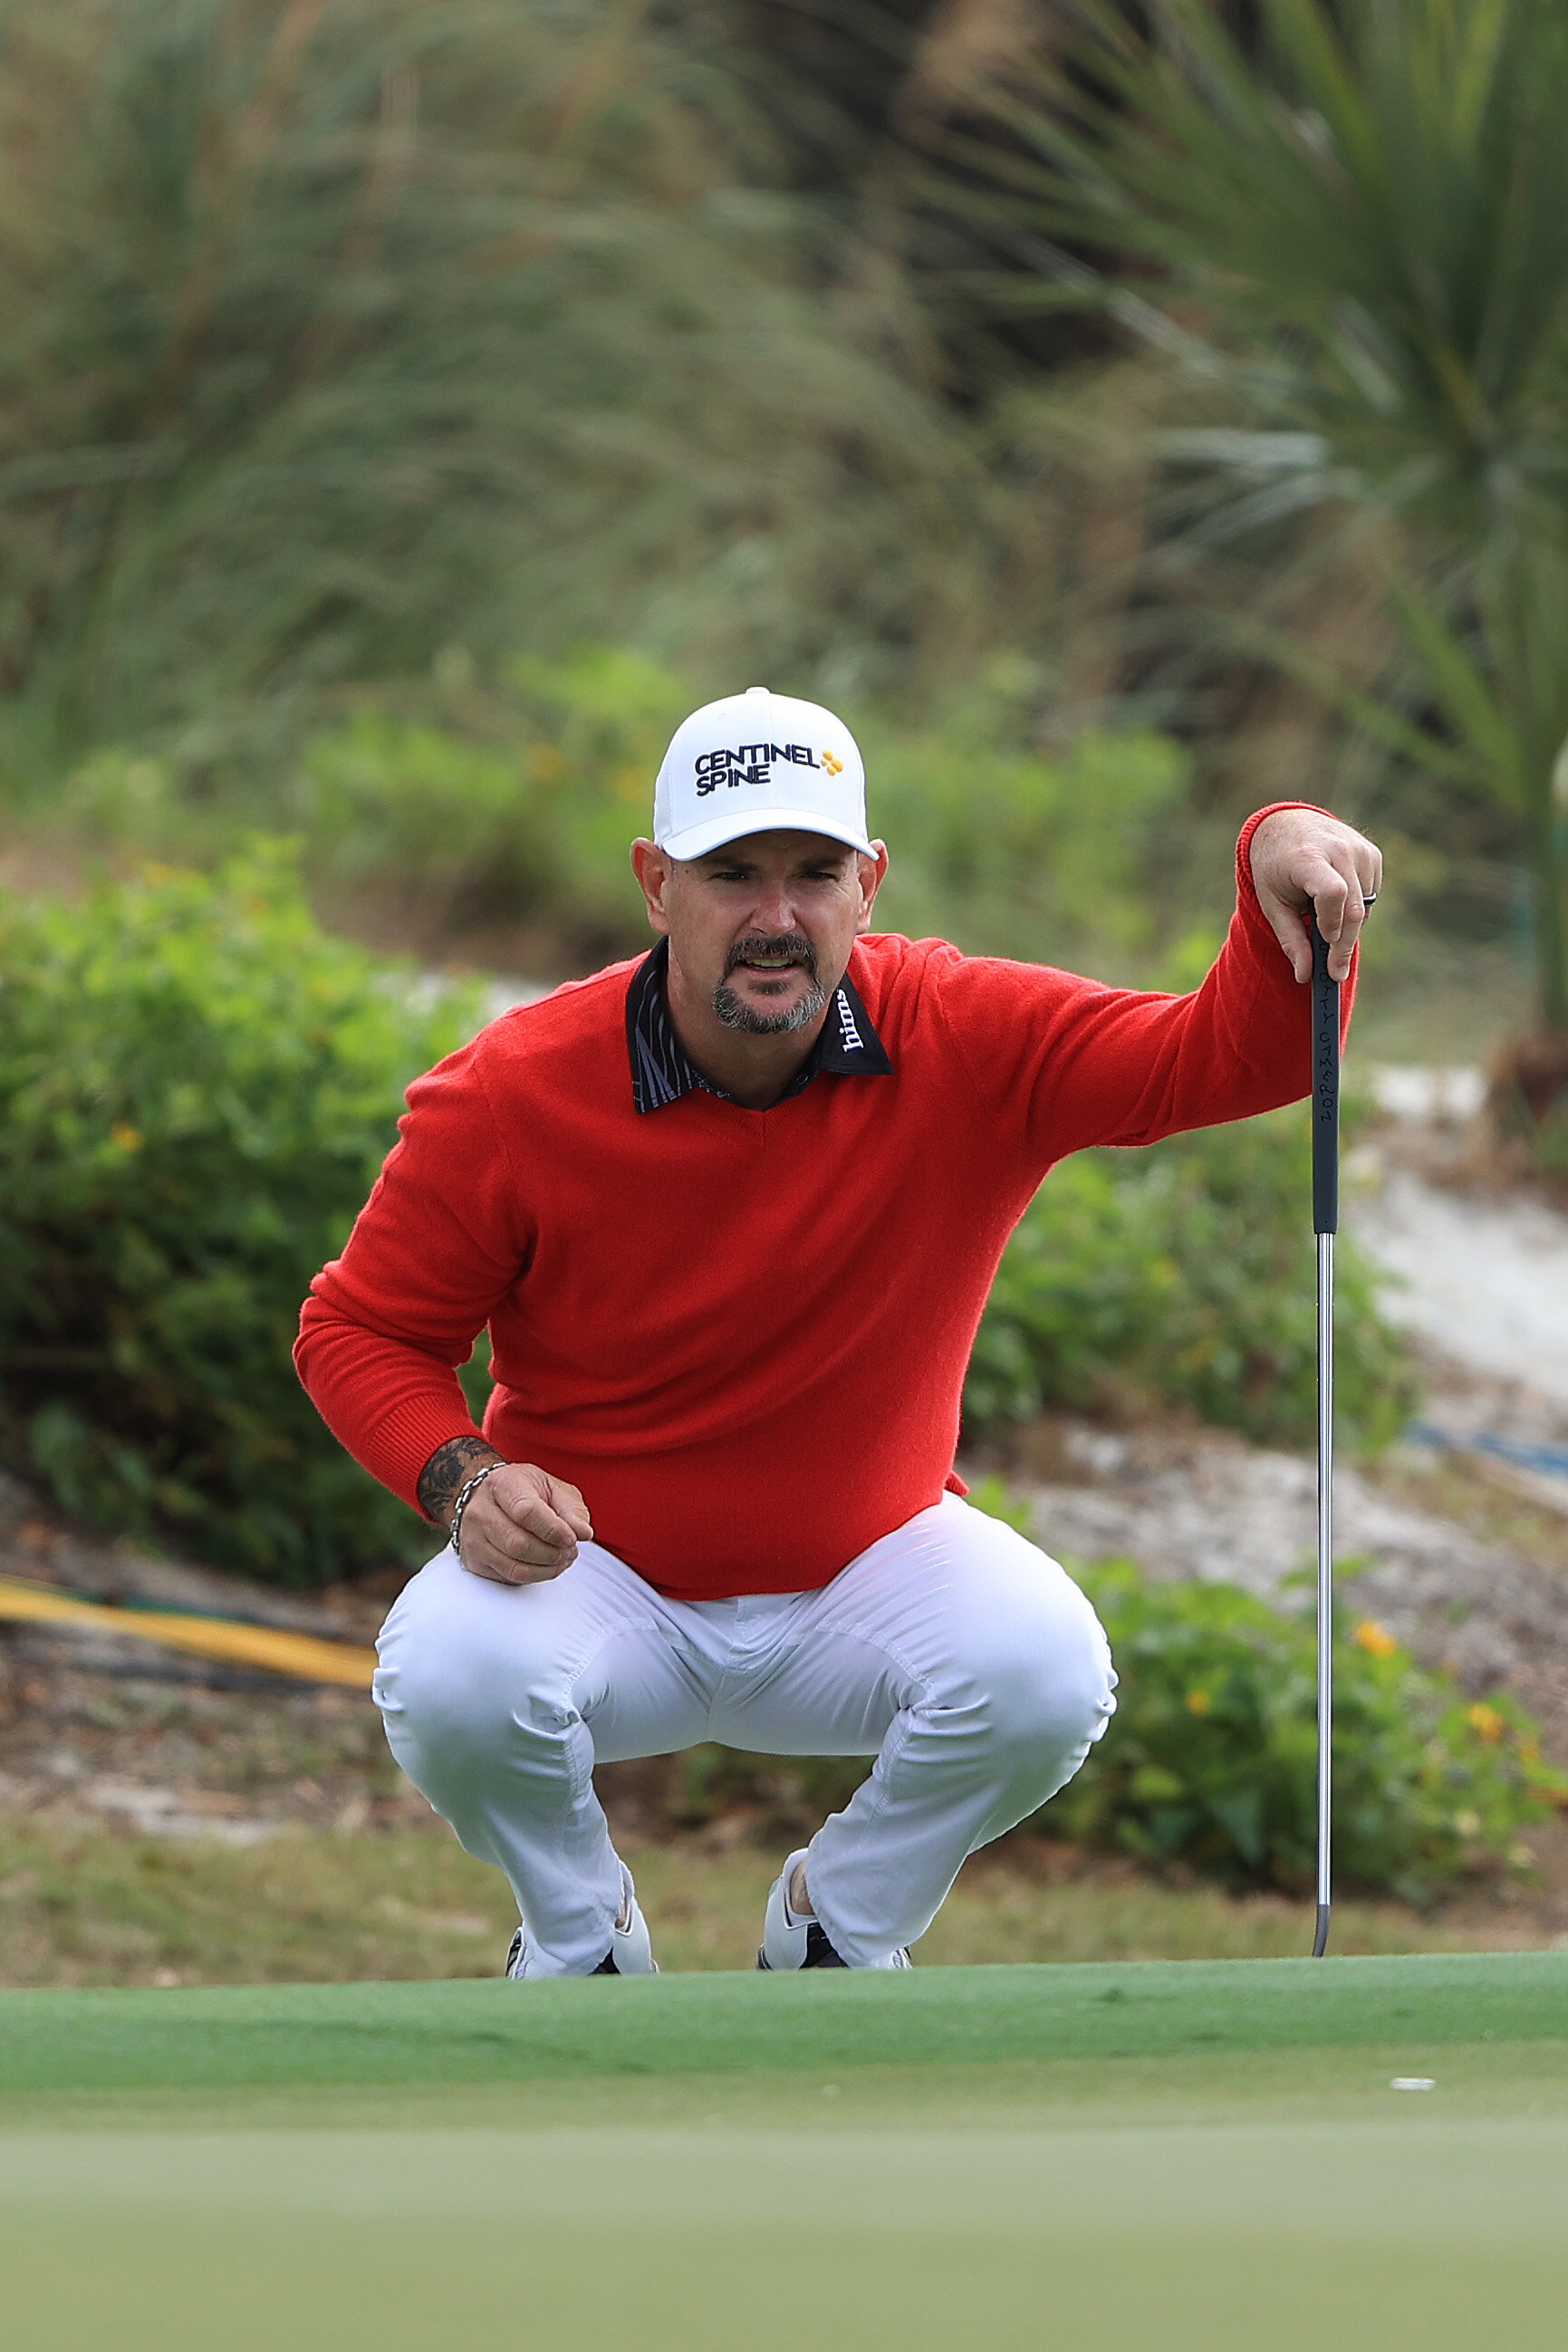  ST SIMONS ISLAND, GEORGIA - NOVEMBER 19: Rory Sabbatini of Slovakia lines up a putt on the eighth hole during the first round of The RSM Classic at the Seaside Course at Sea Island Golf Club on November 19, 2020 in St Simons Island, Georgia. (Photo 